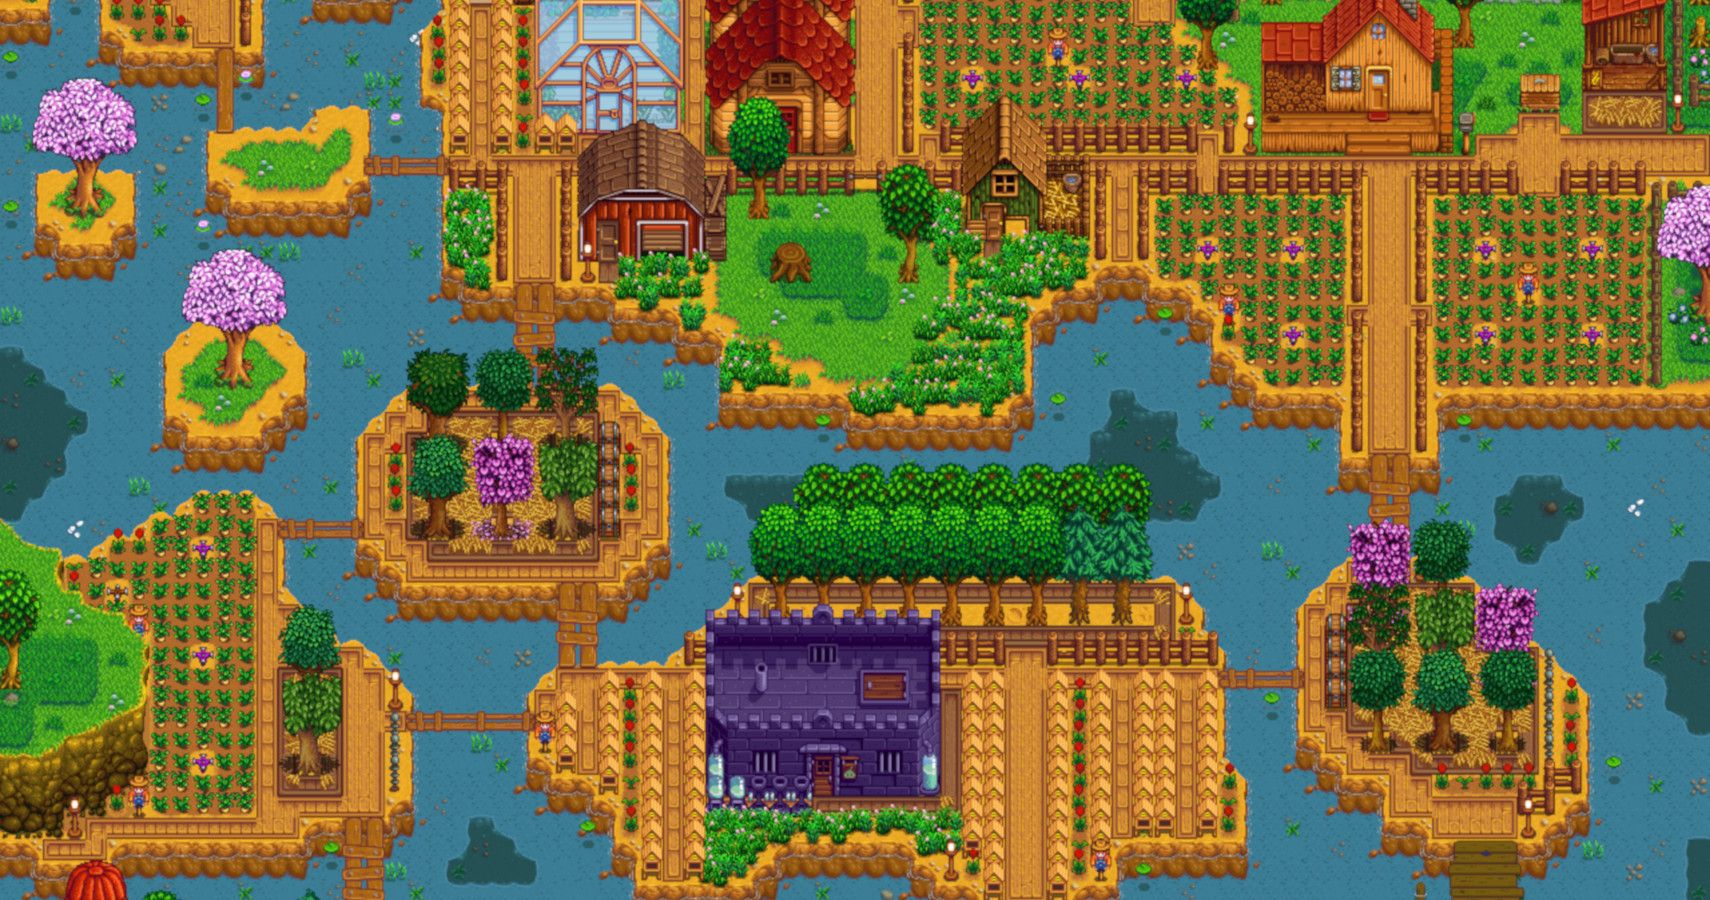 10 Best Stardew Valley Farm Layouts thesupertimes com. thesupertimes.com. 